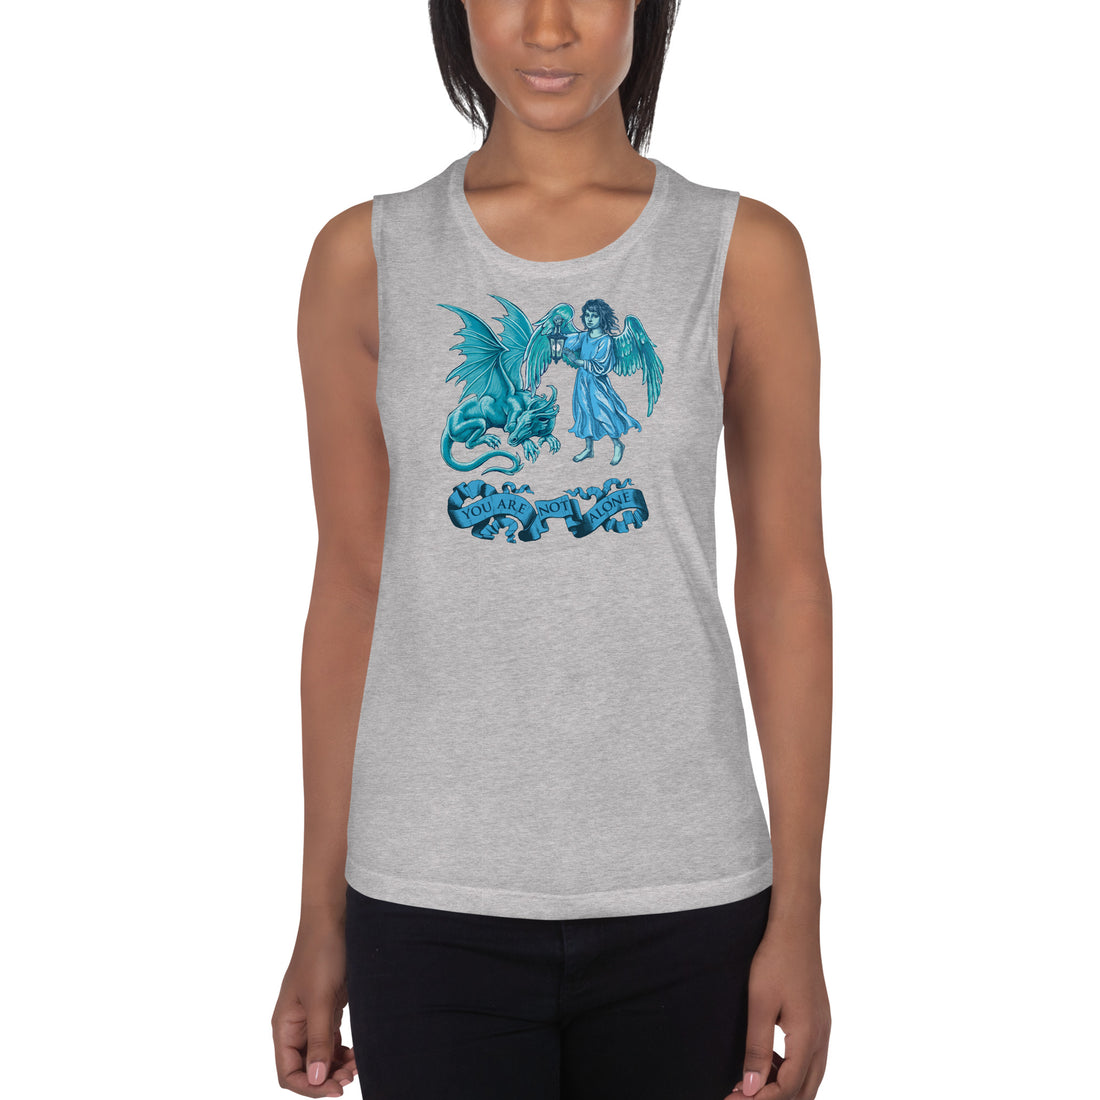 You Are Not Alone Tank Top -  affirmation, support, motivational message T-Shirt, relaxed fit -  angel, dragon